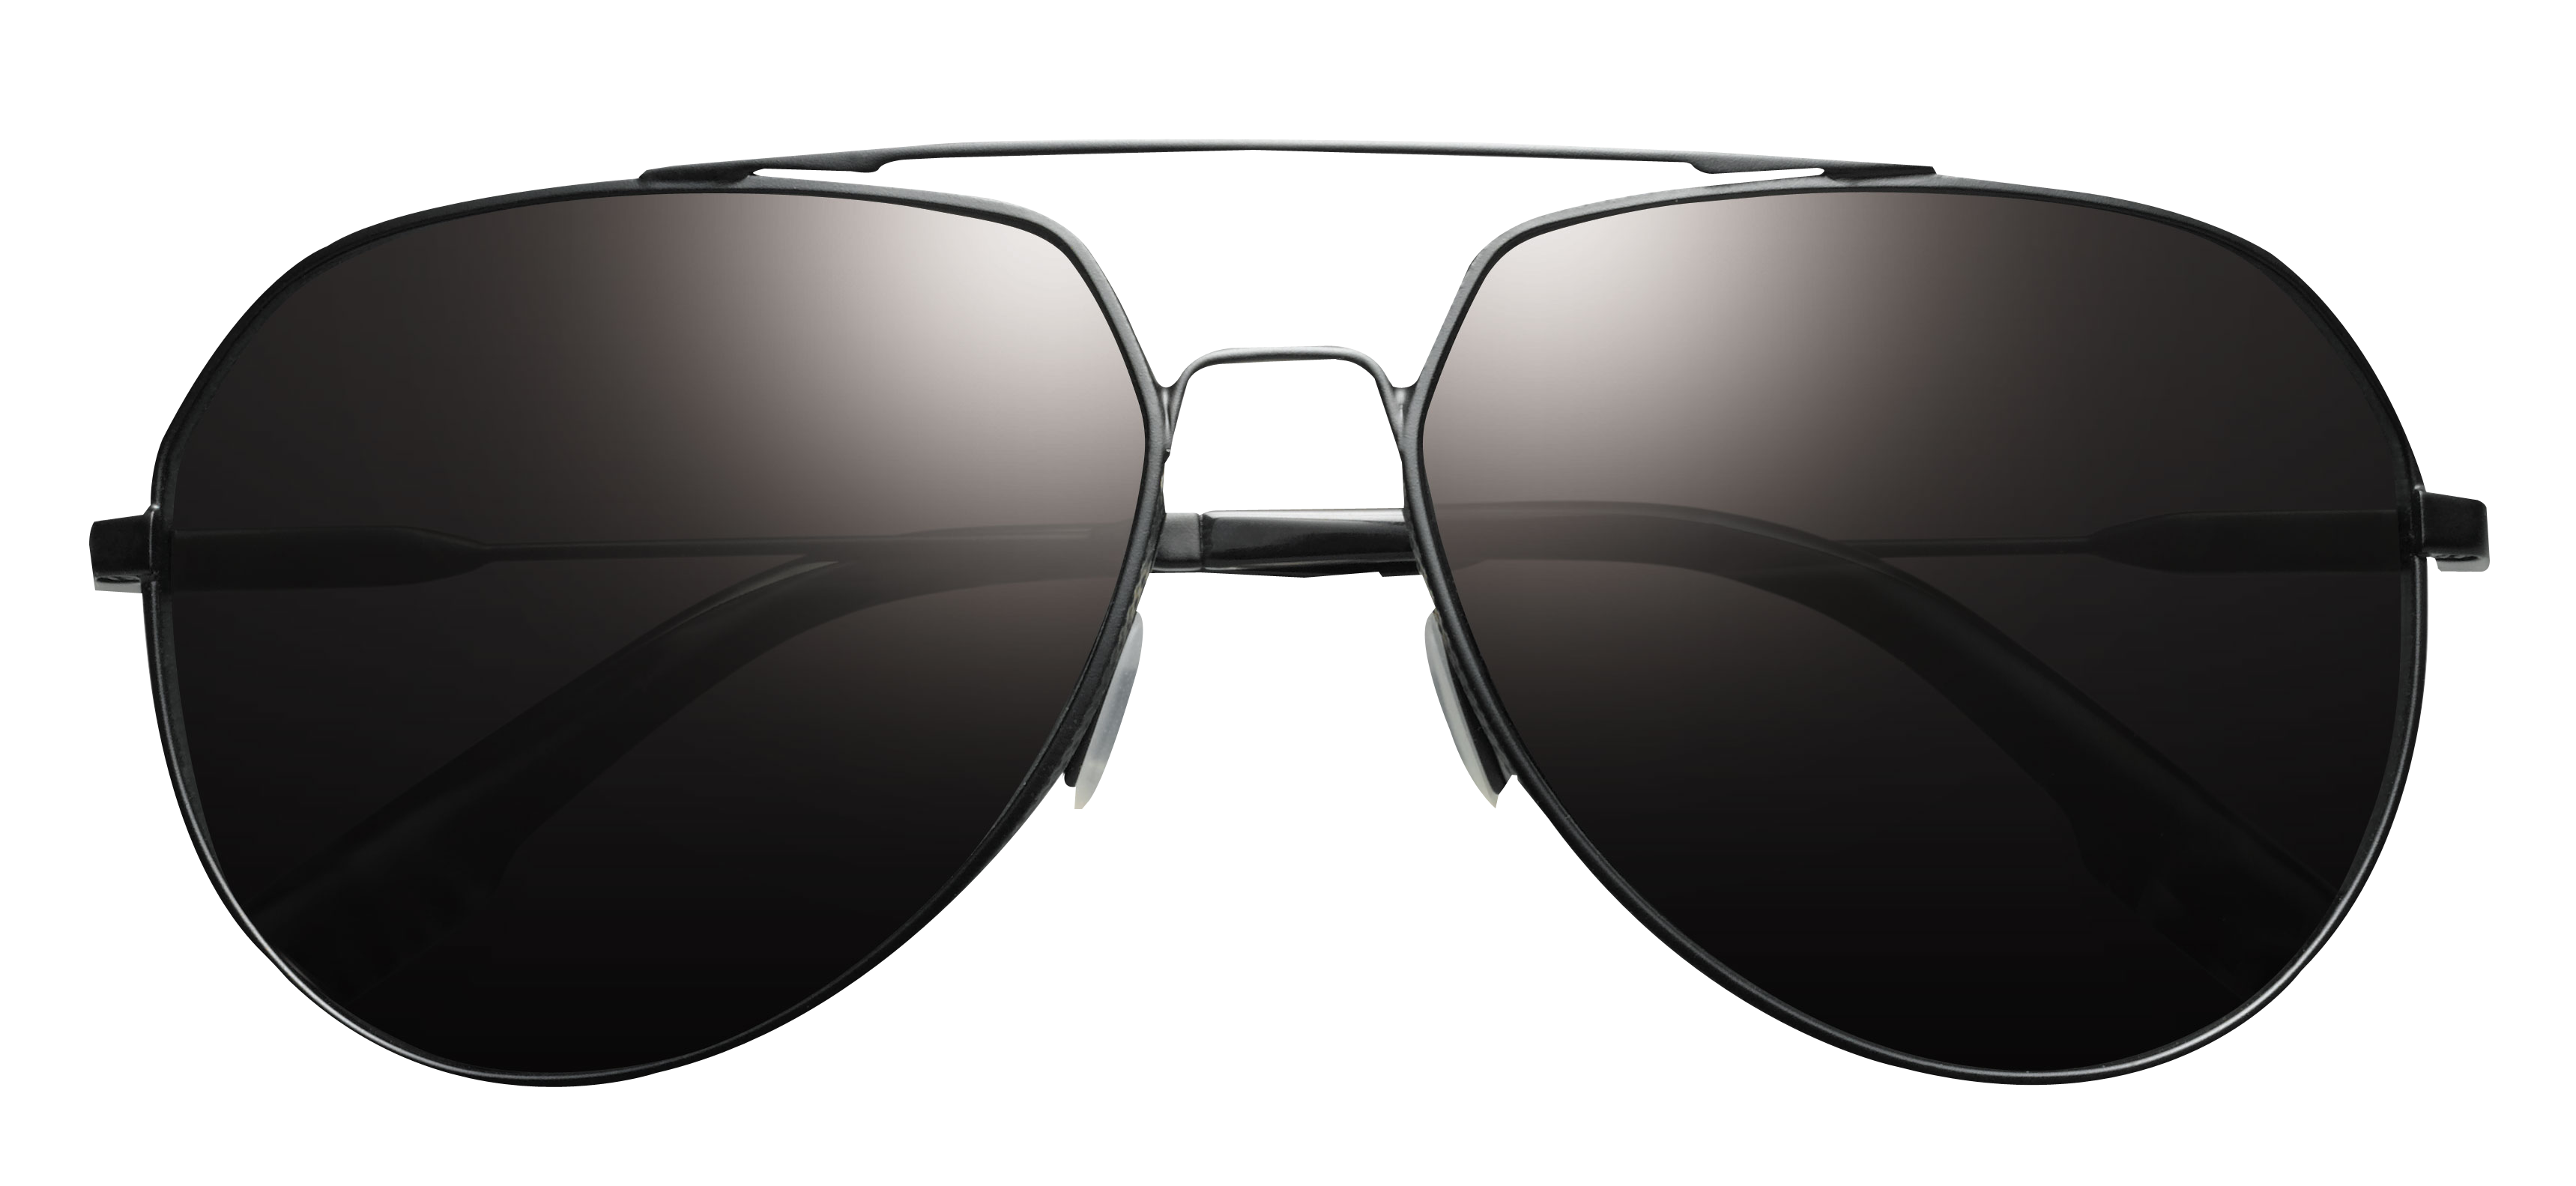 download-sunglass-png-image-for-free